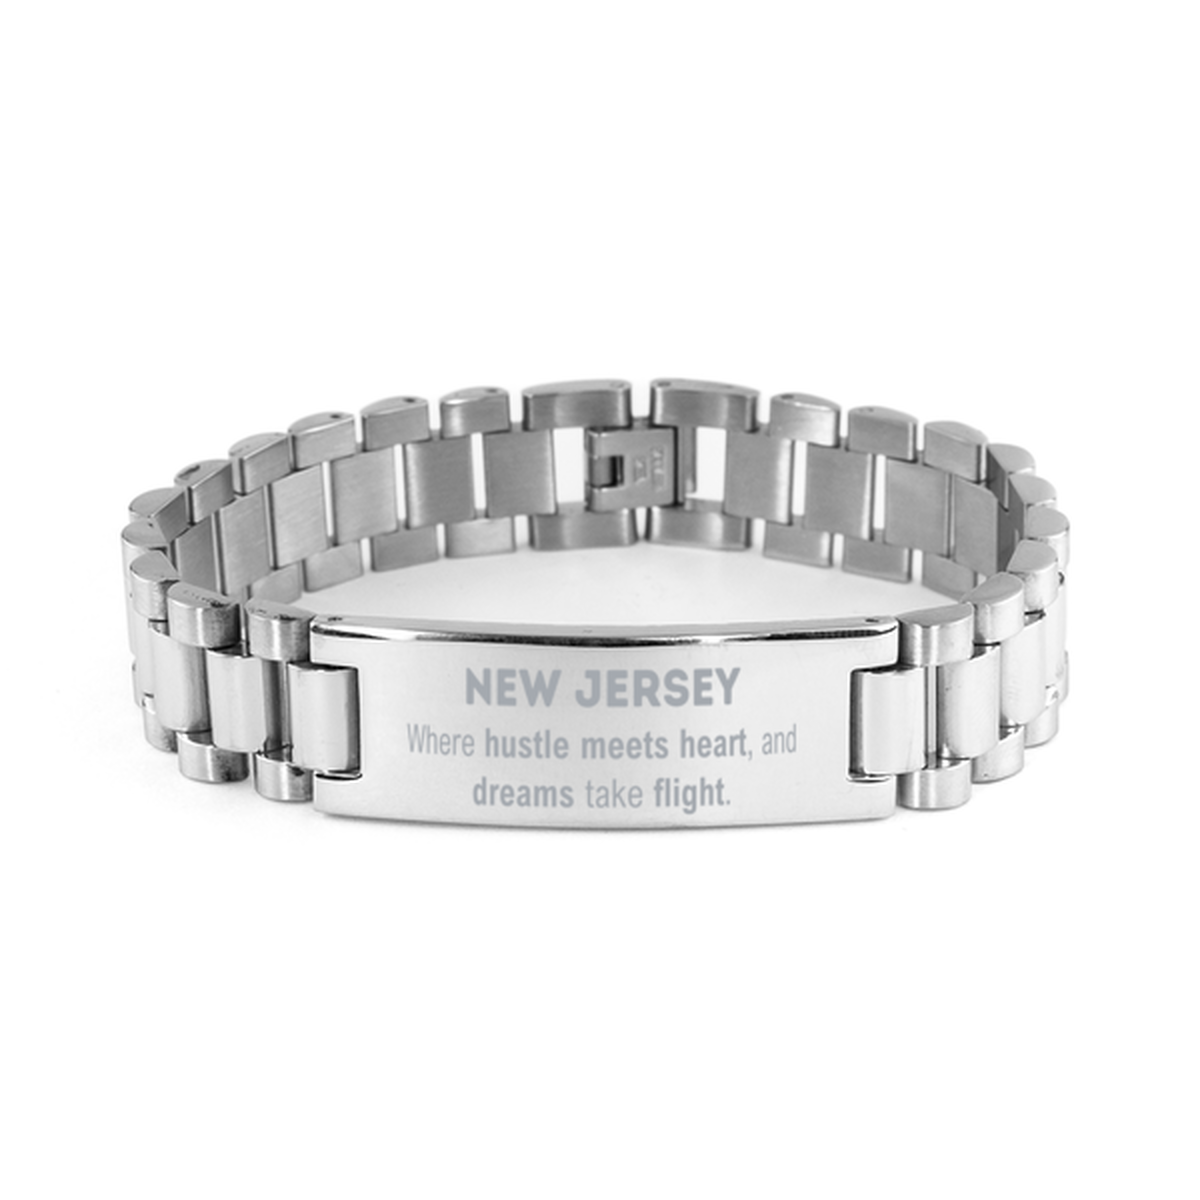 New Jersey: Where hustle meets heart, and dreams take flight, New Jersey Gifts, Proud New Jersey Christmas Birthday New Jersey Ladder Stainless Steel Bracelet, New Jersey State People, Men, Women, Friends